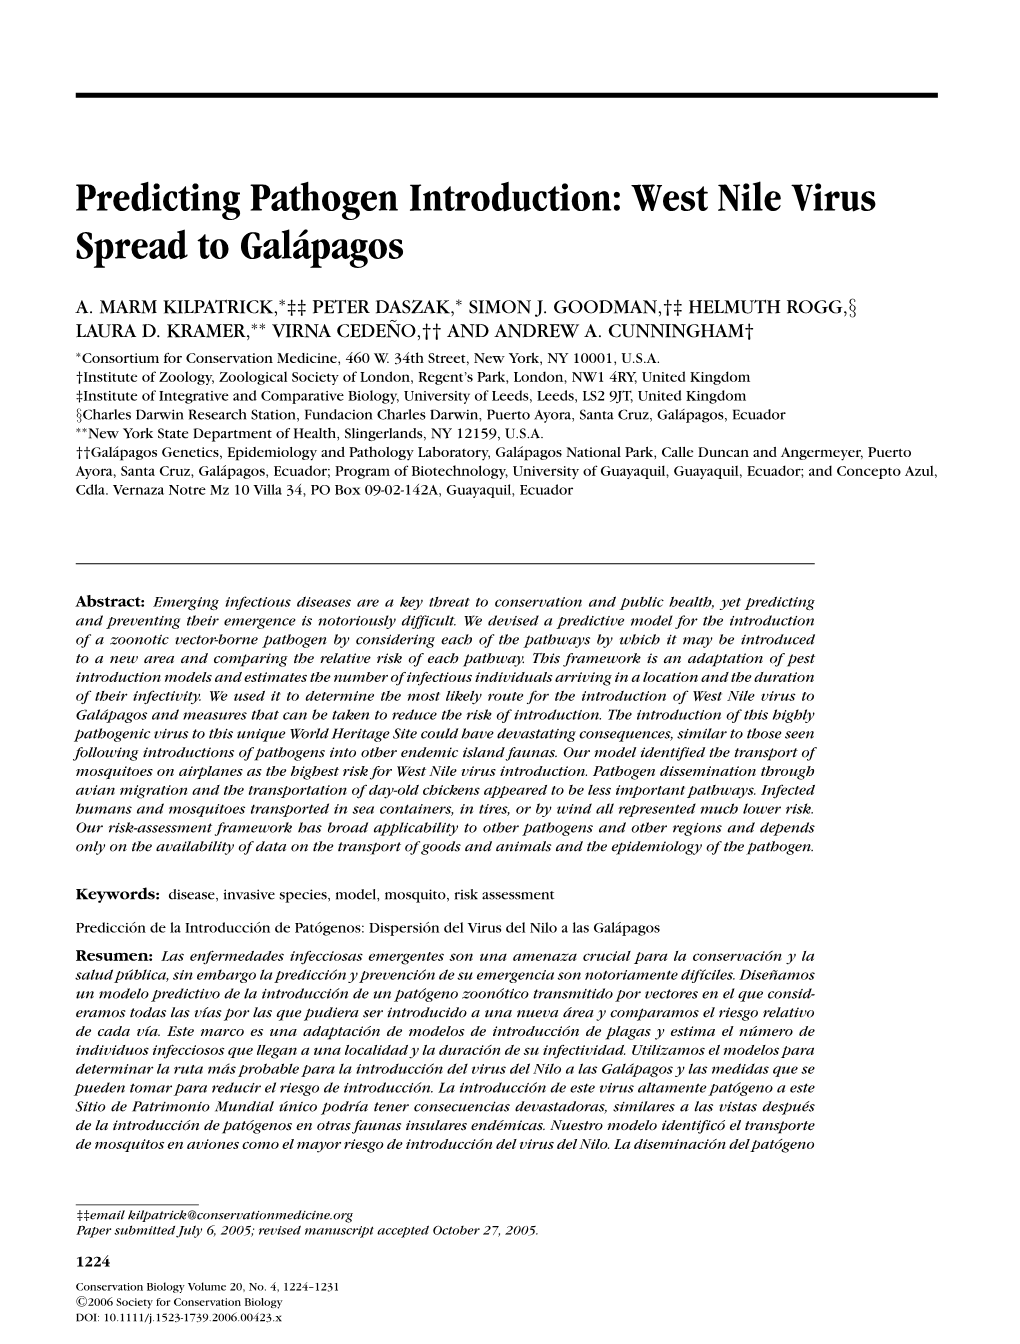 Predicting Pathogen Introduction: West Nile Virus Spread to Gal´Apagos